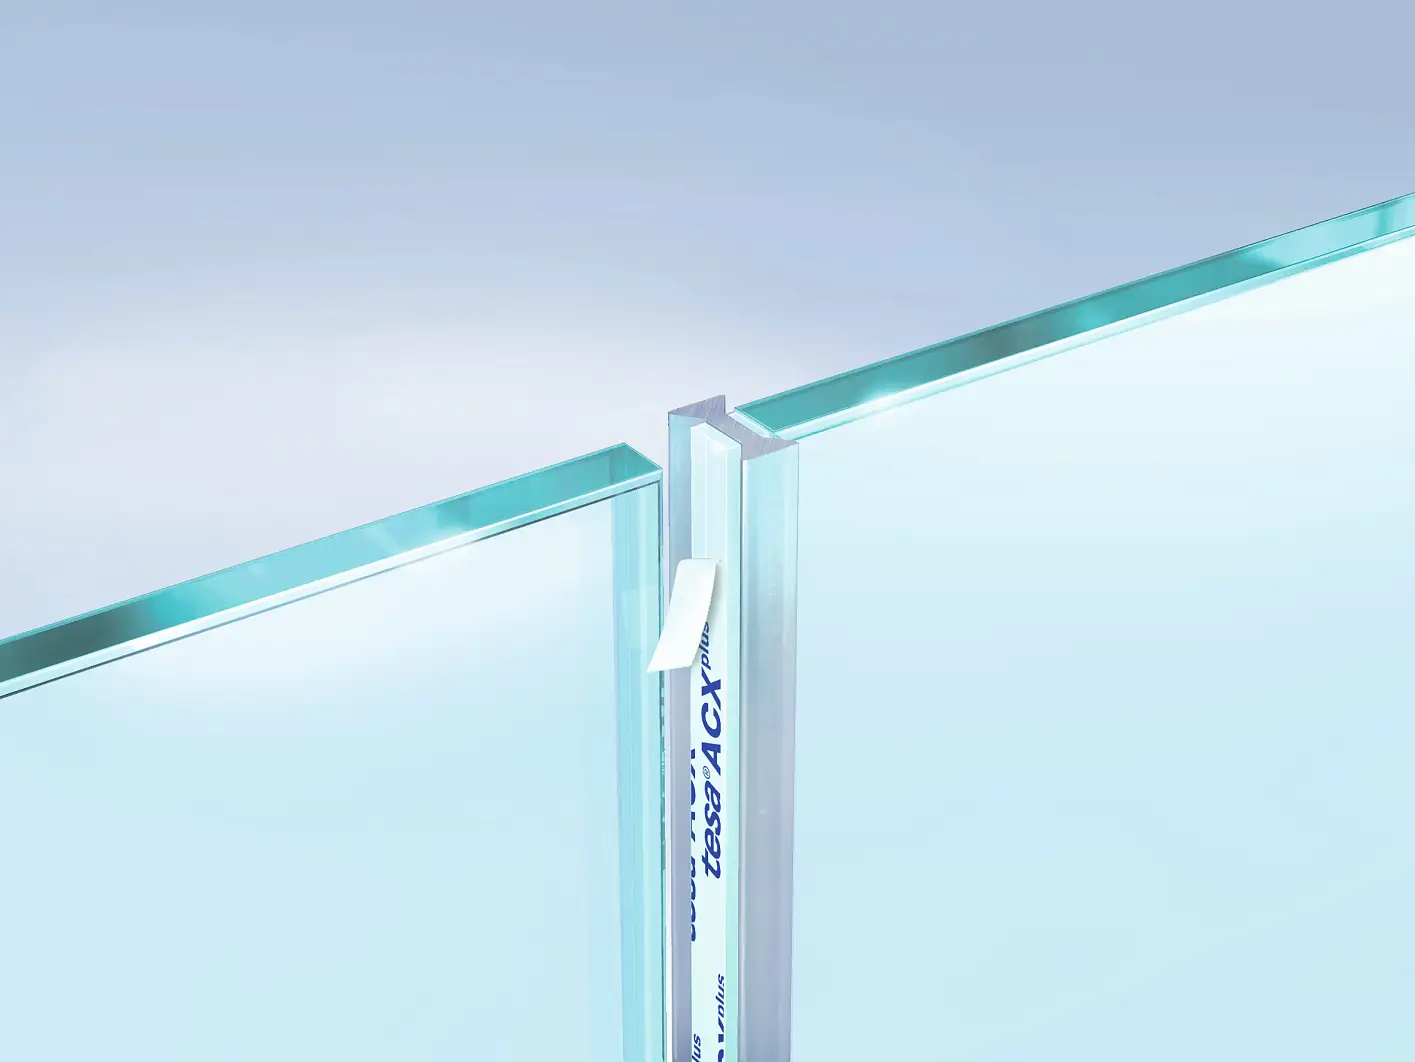 Bonding a Slim and nearly invisible H-Profile between two glas panels